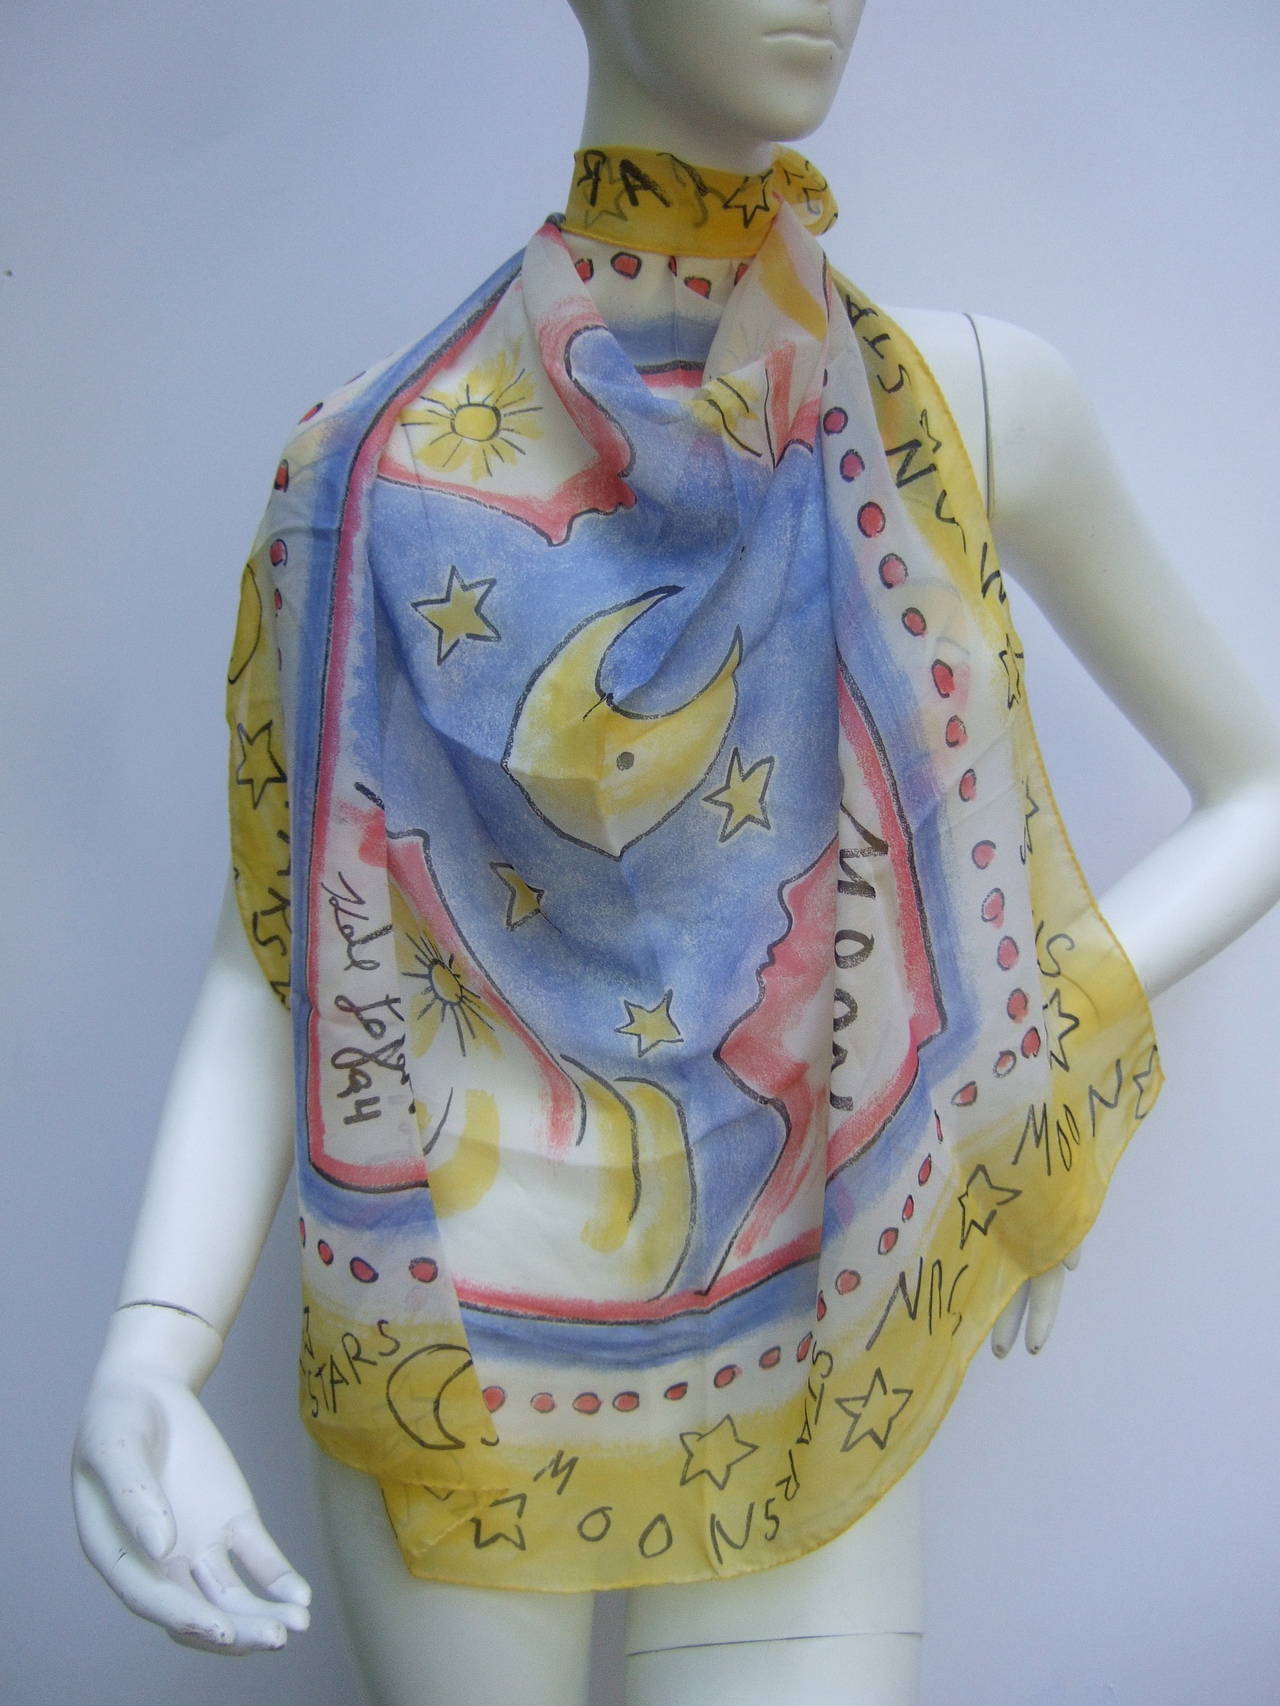 Karl Lagerfeld Silk celestial sun, moon & stars scarf c 1994
The stylish sheer scarf is illustrated with four ethereal women
in each corner. The center graphics are illuminated with a midnight
blue sky embellished with a crescent moon & clusters